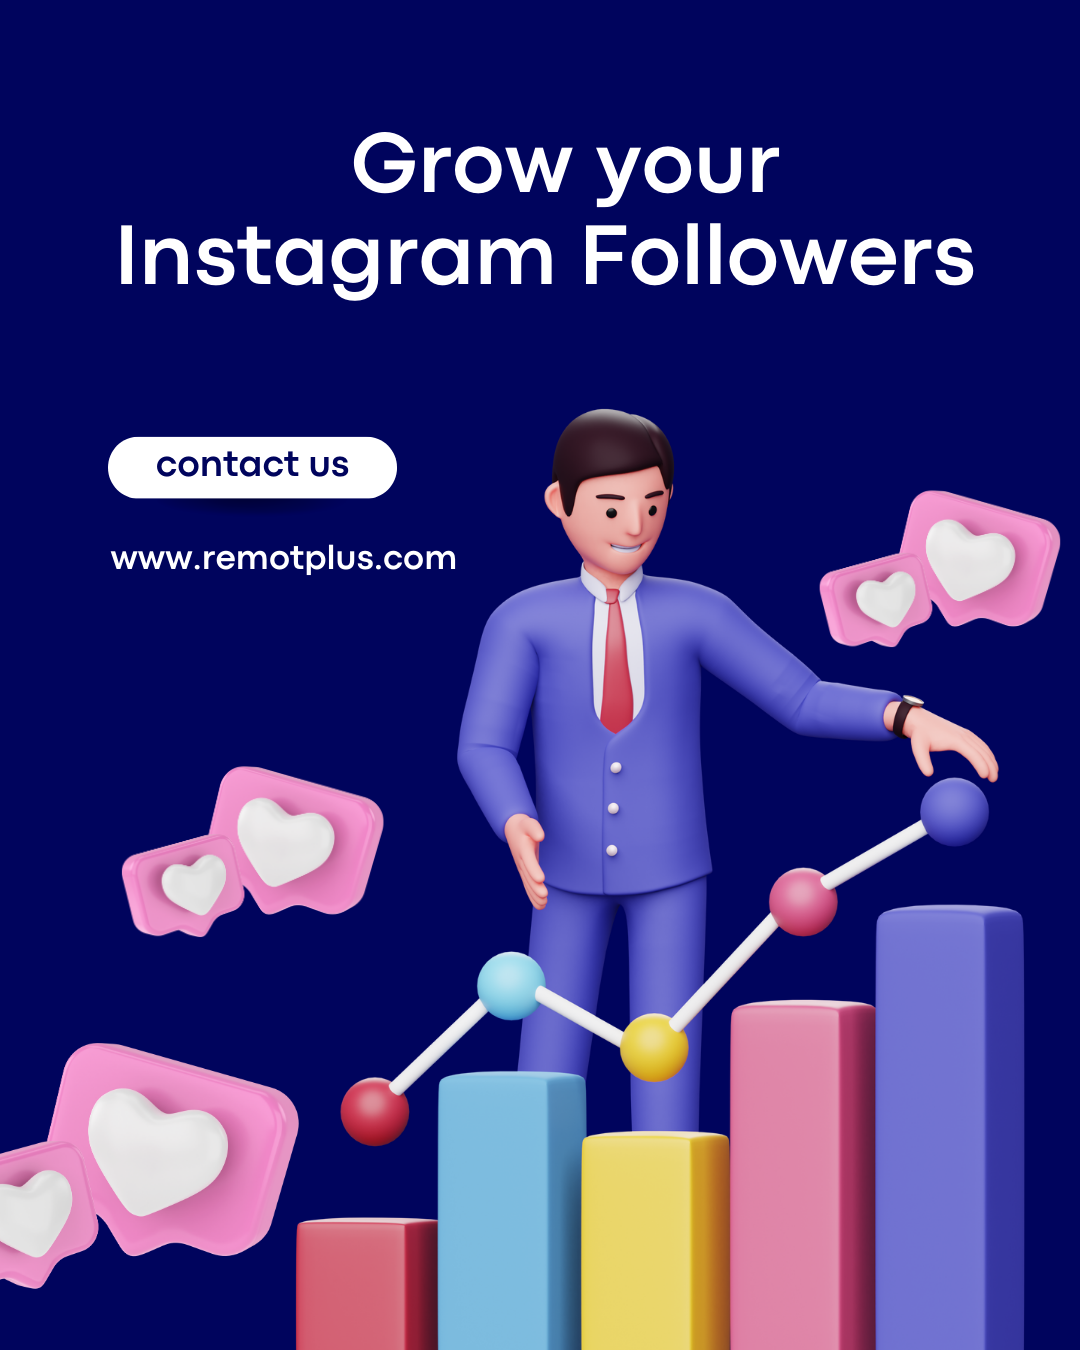 Do you want to grow your personal or Business Instagram page?

If you are looking for someone to hel